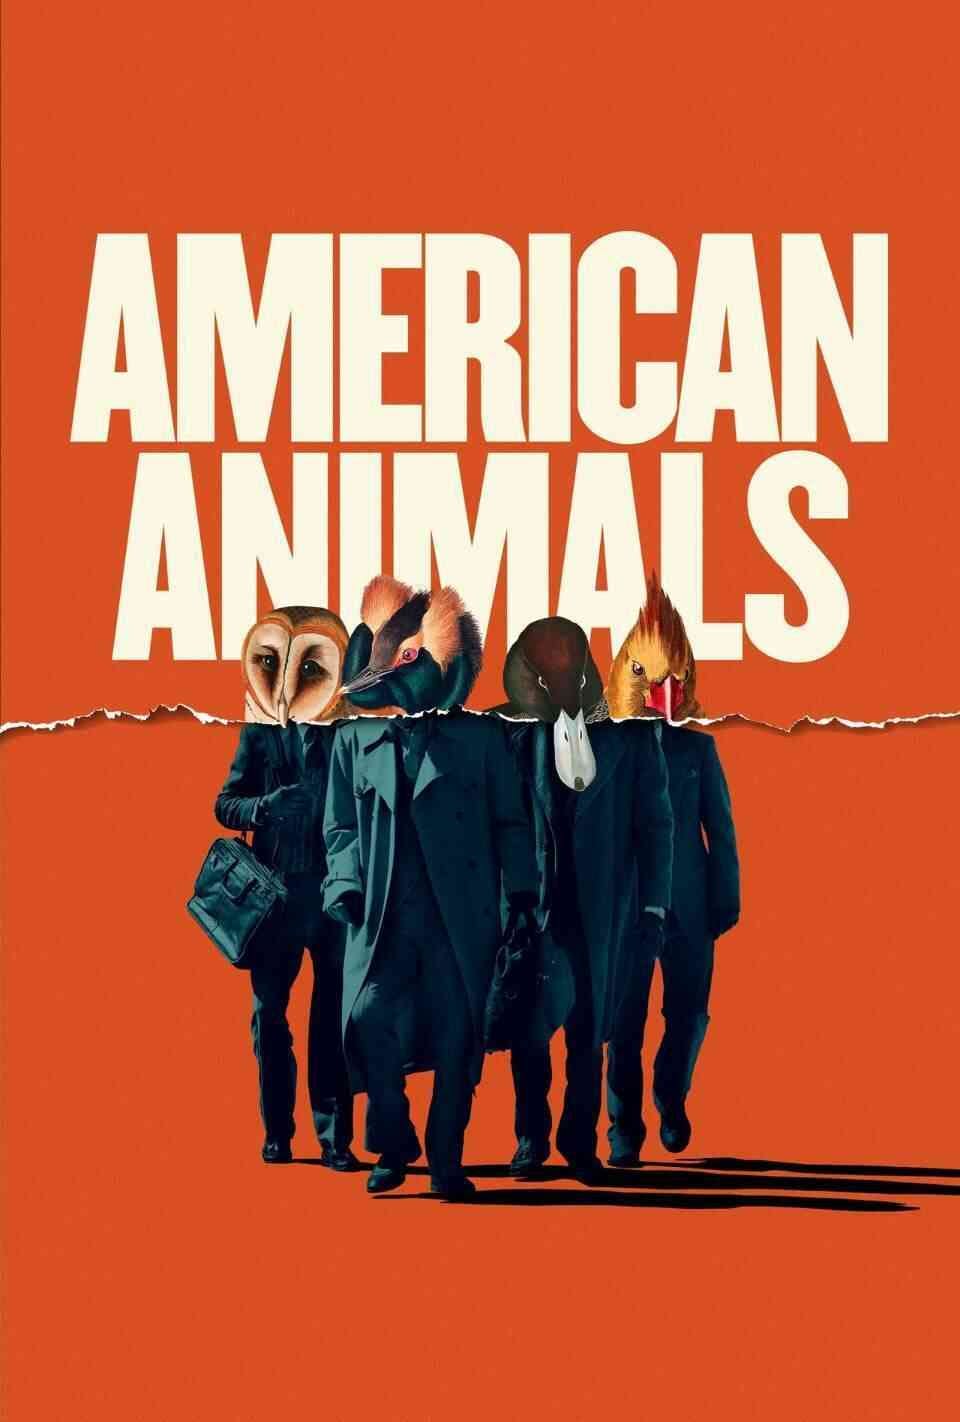 Read American Animals screenplay (poster)